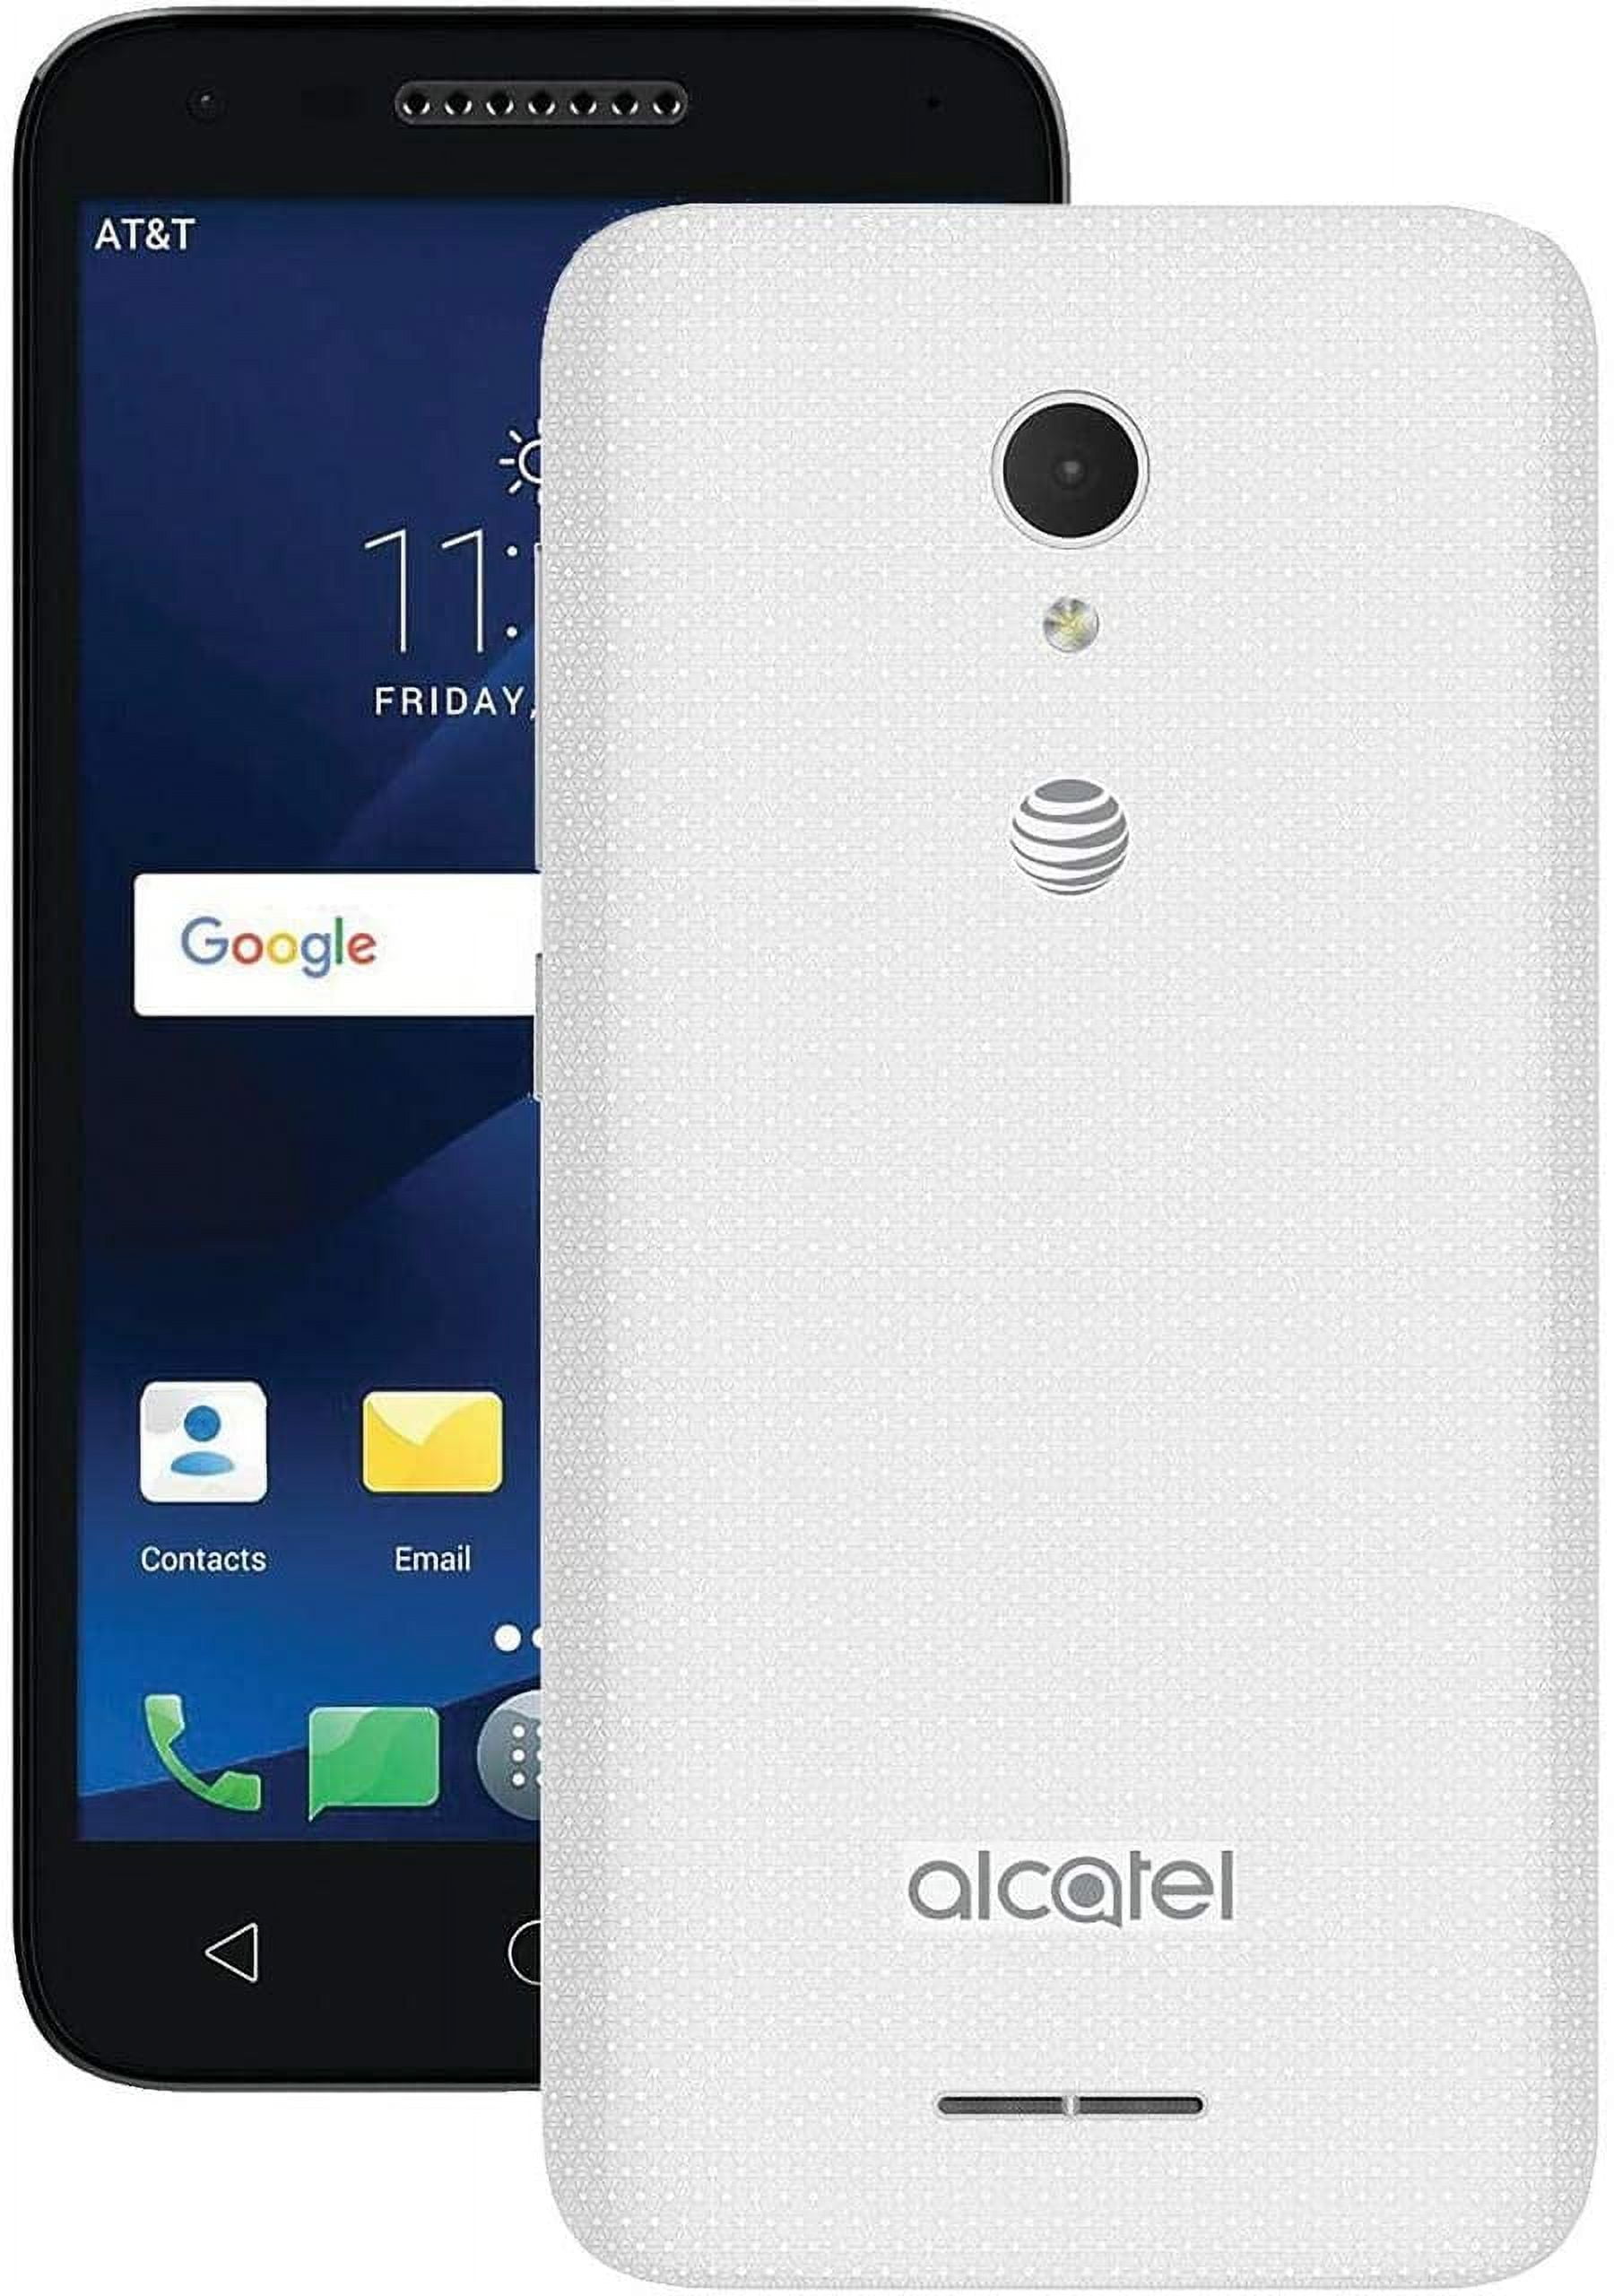 Alcatel - CAMEOX 4G LTE with 16GB Memory Cell Phone - Arctic White (AT&T)